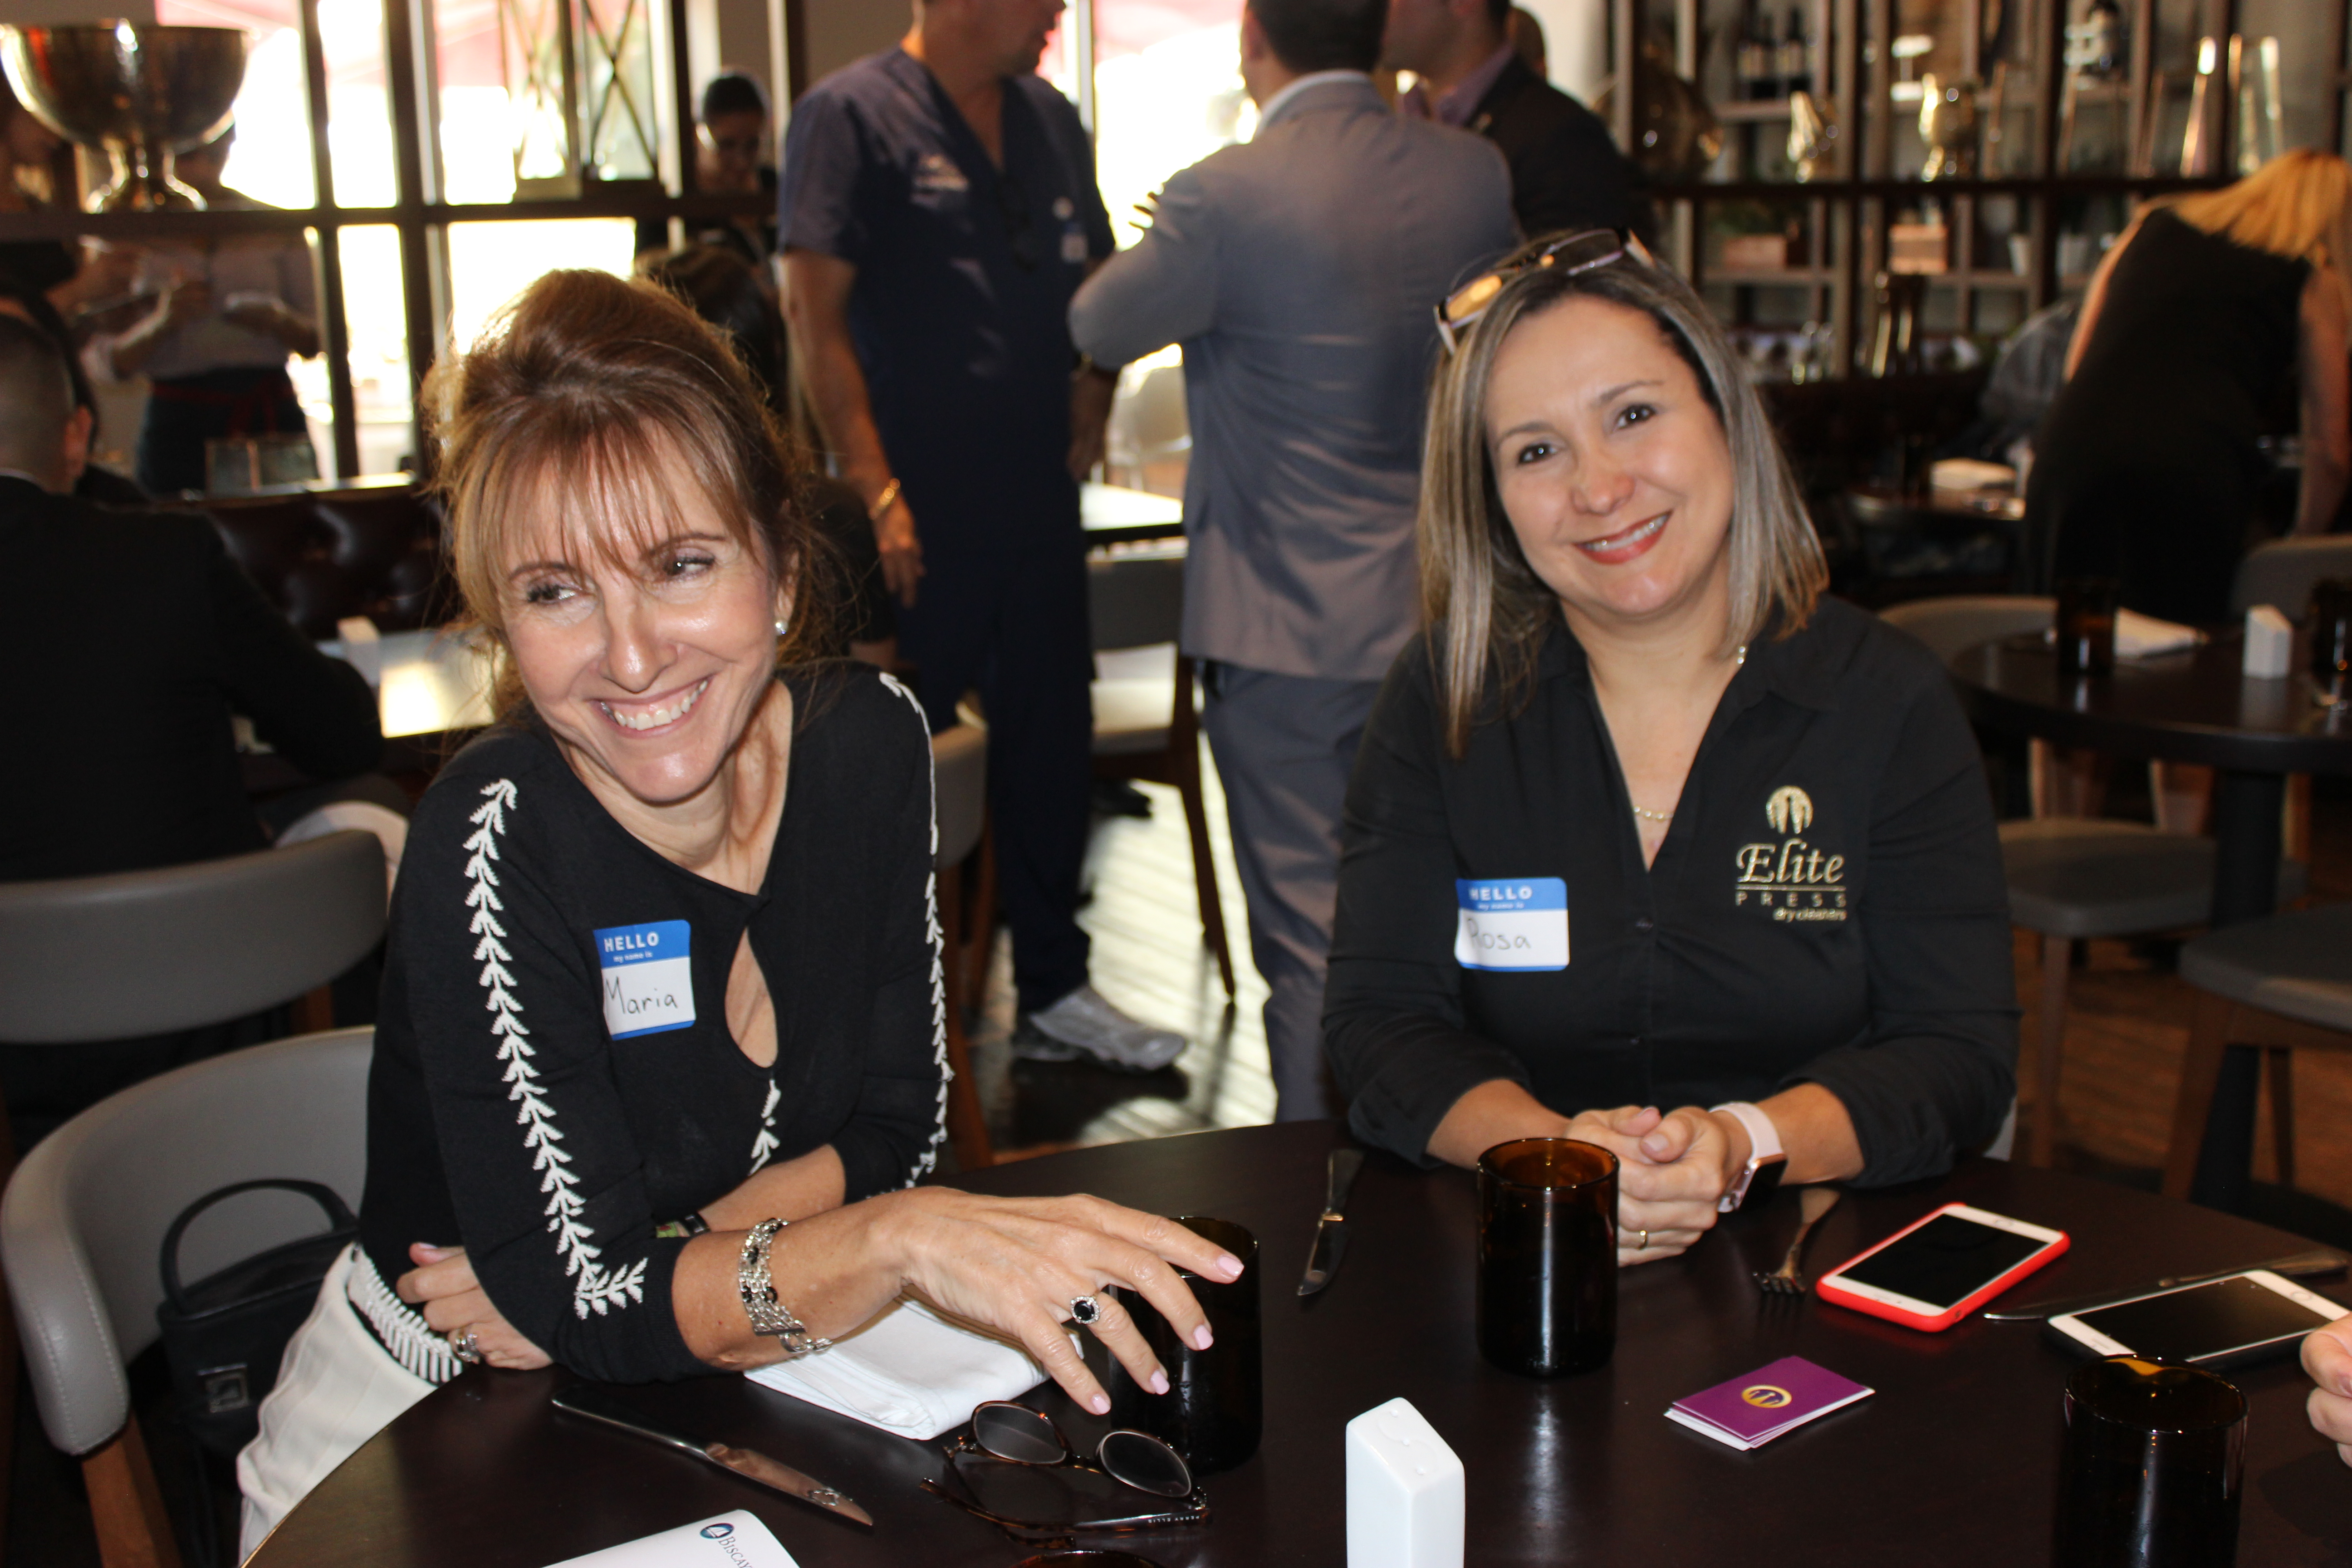 ElitePress at Gusto Ristobar Luncheon hosted by the Doral Chamber of Commerce.